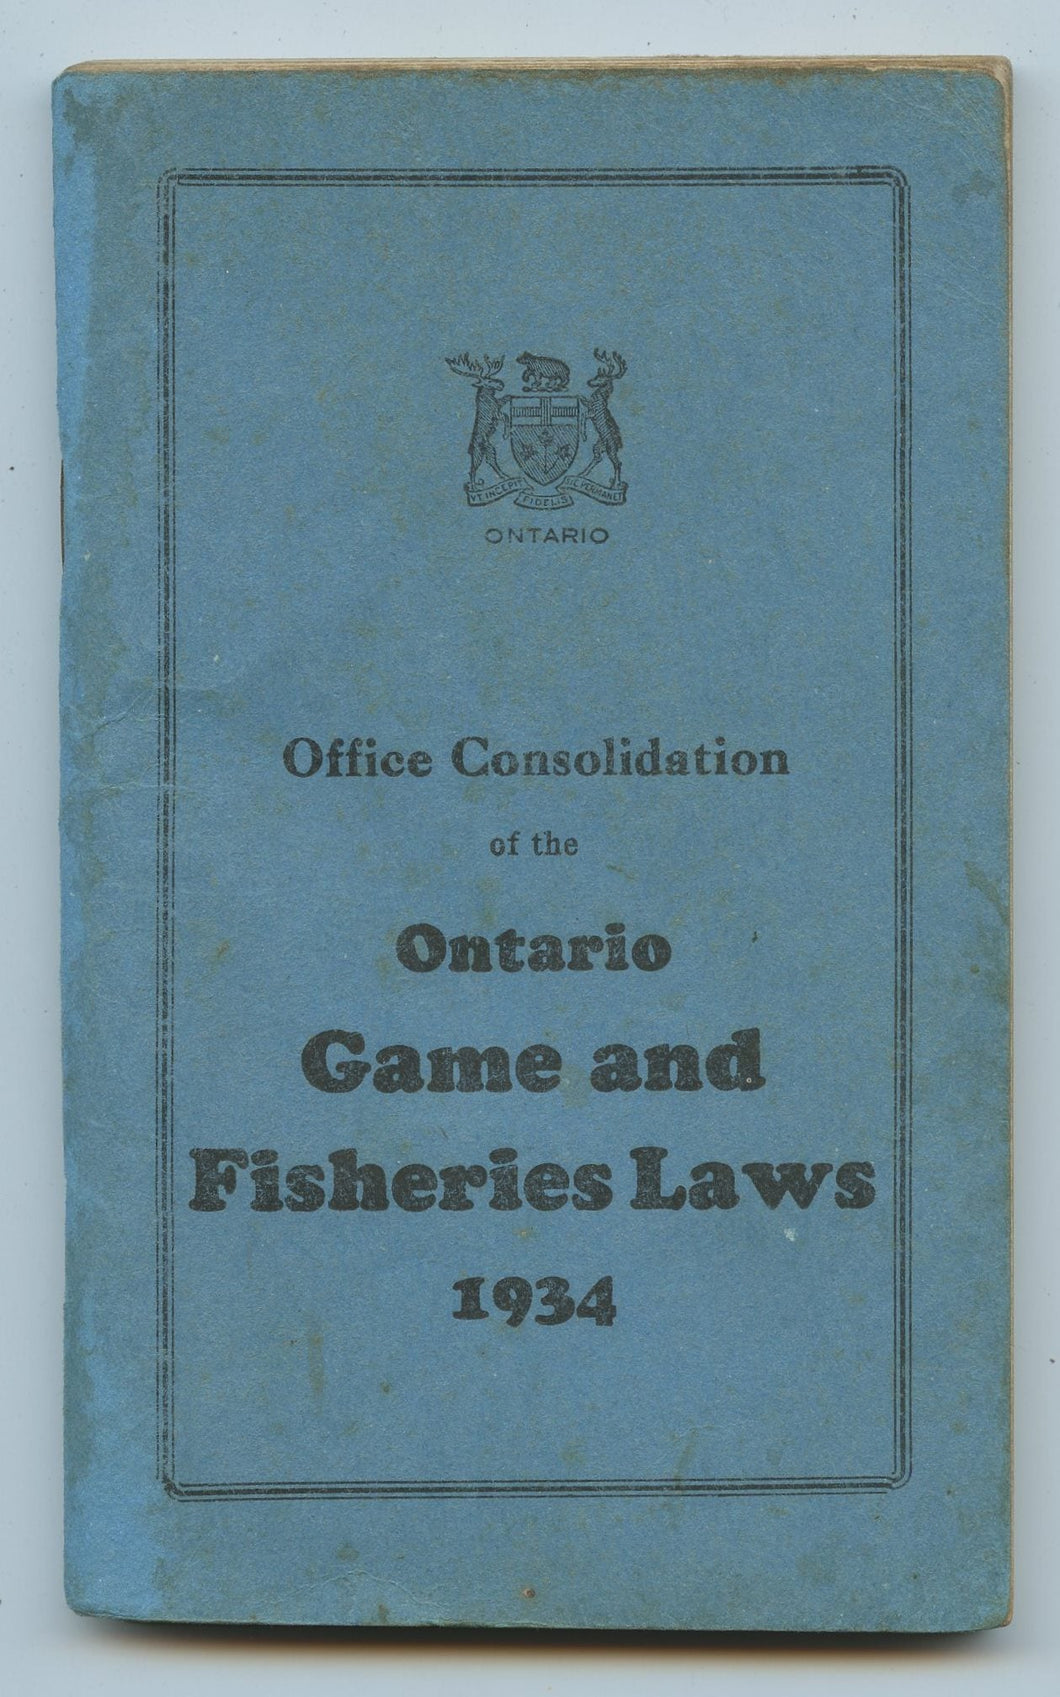 Office Consolidation of the Ontario Game and Fisheries Laws 1934